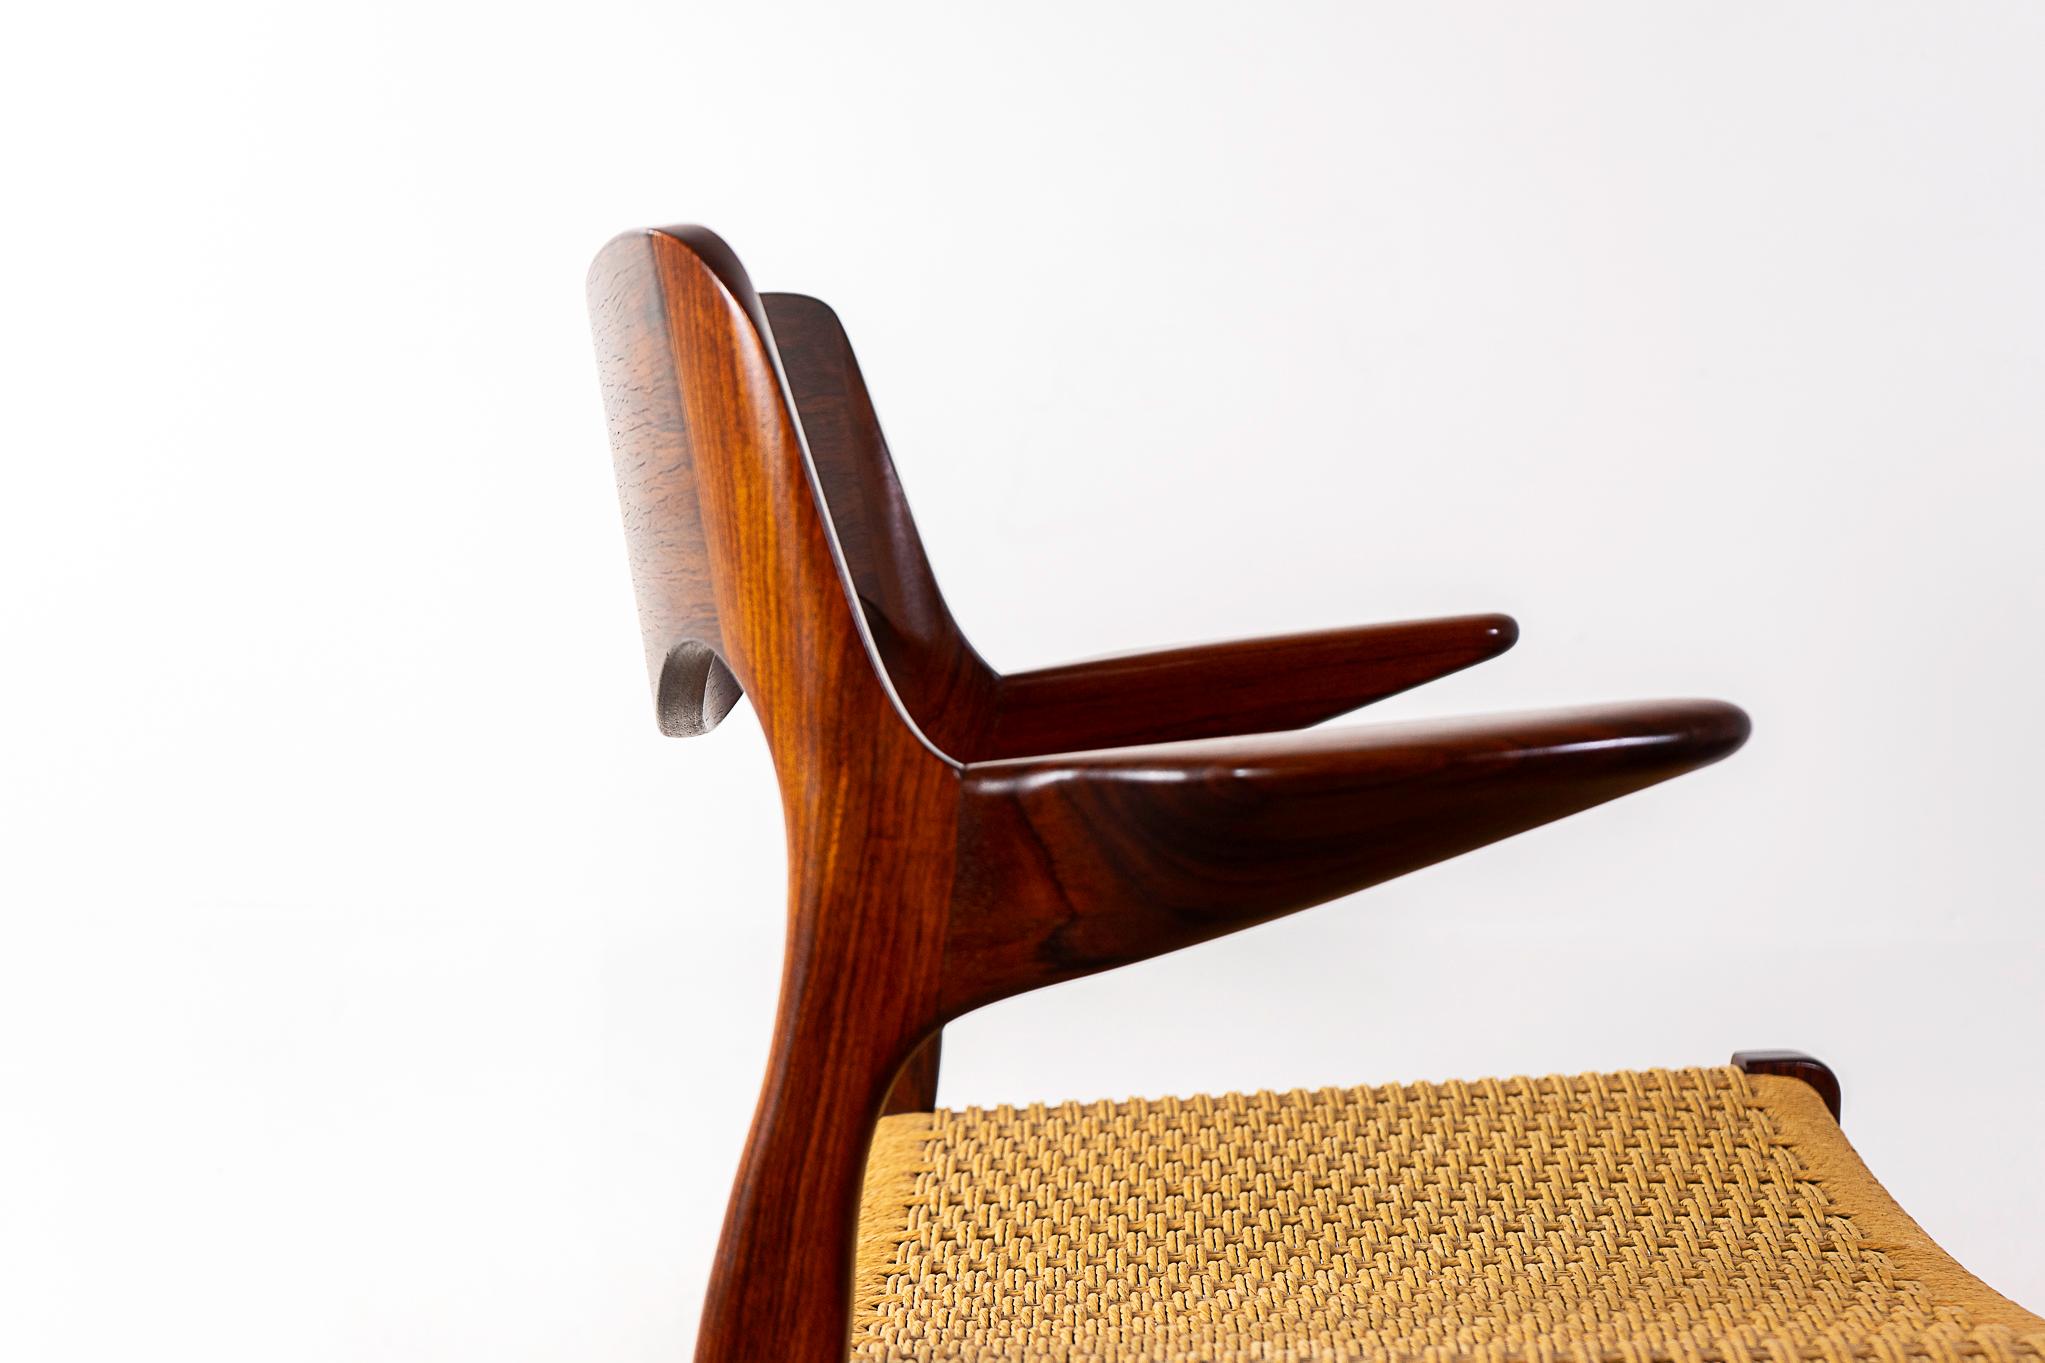 Papercord Rosewood Model 55 Armchair by Niels Otto Moller For Sale